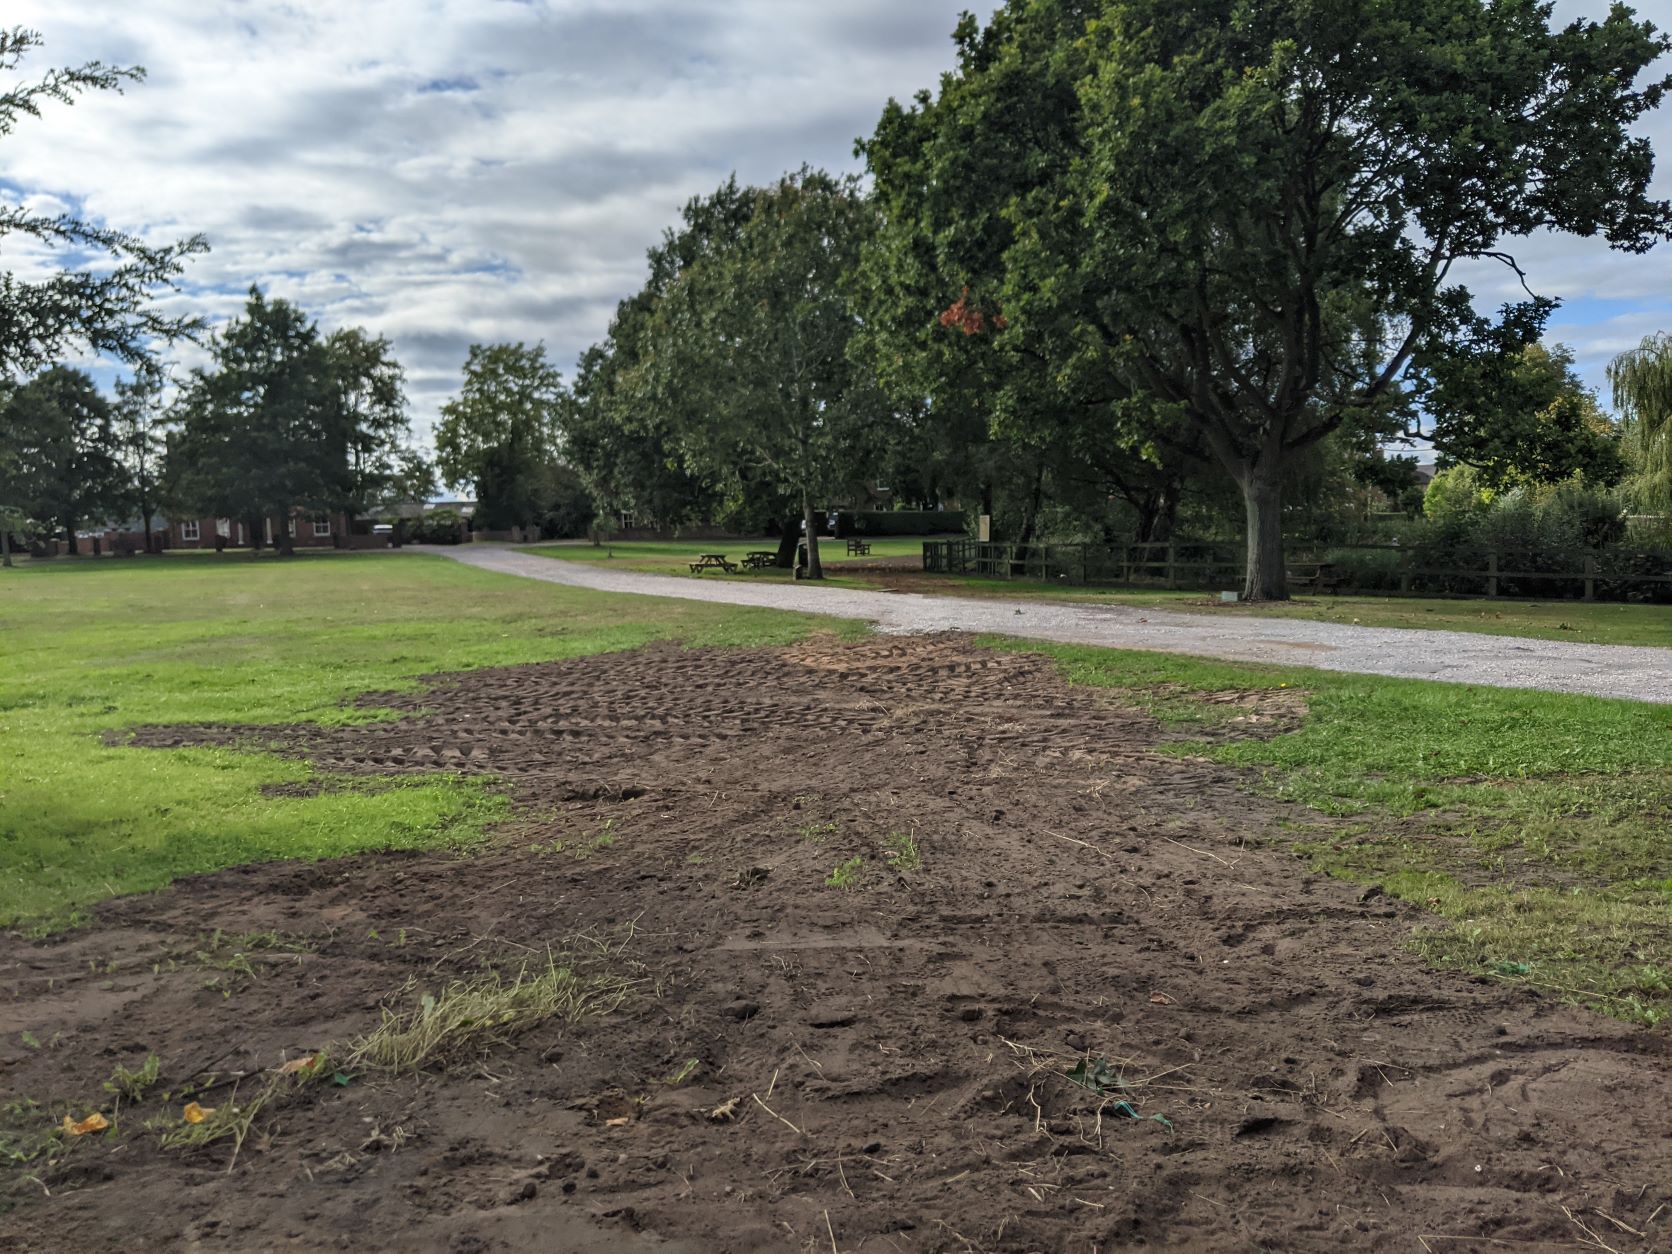 Excavations on the Green completed, September 2021